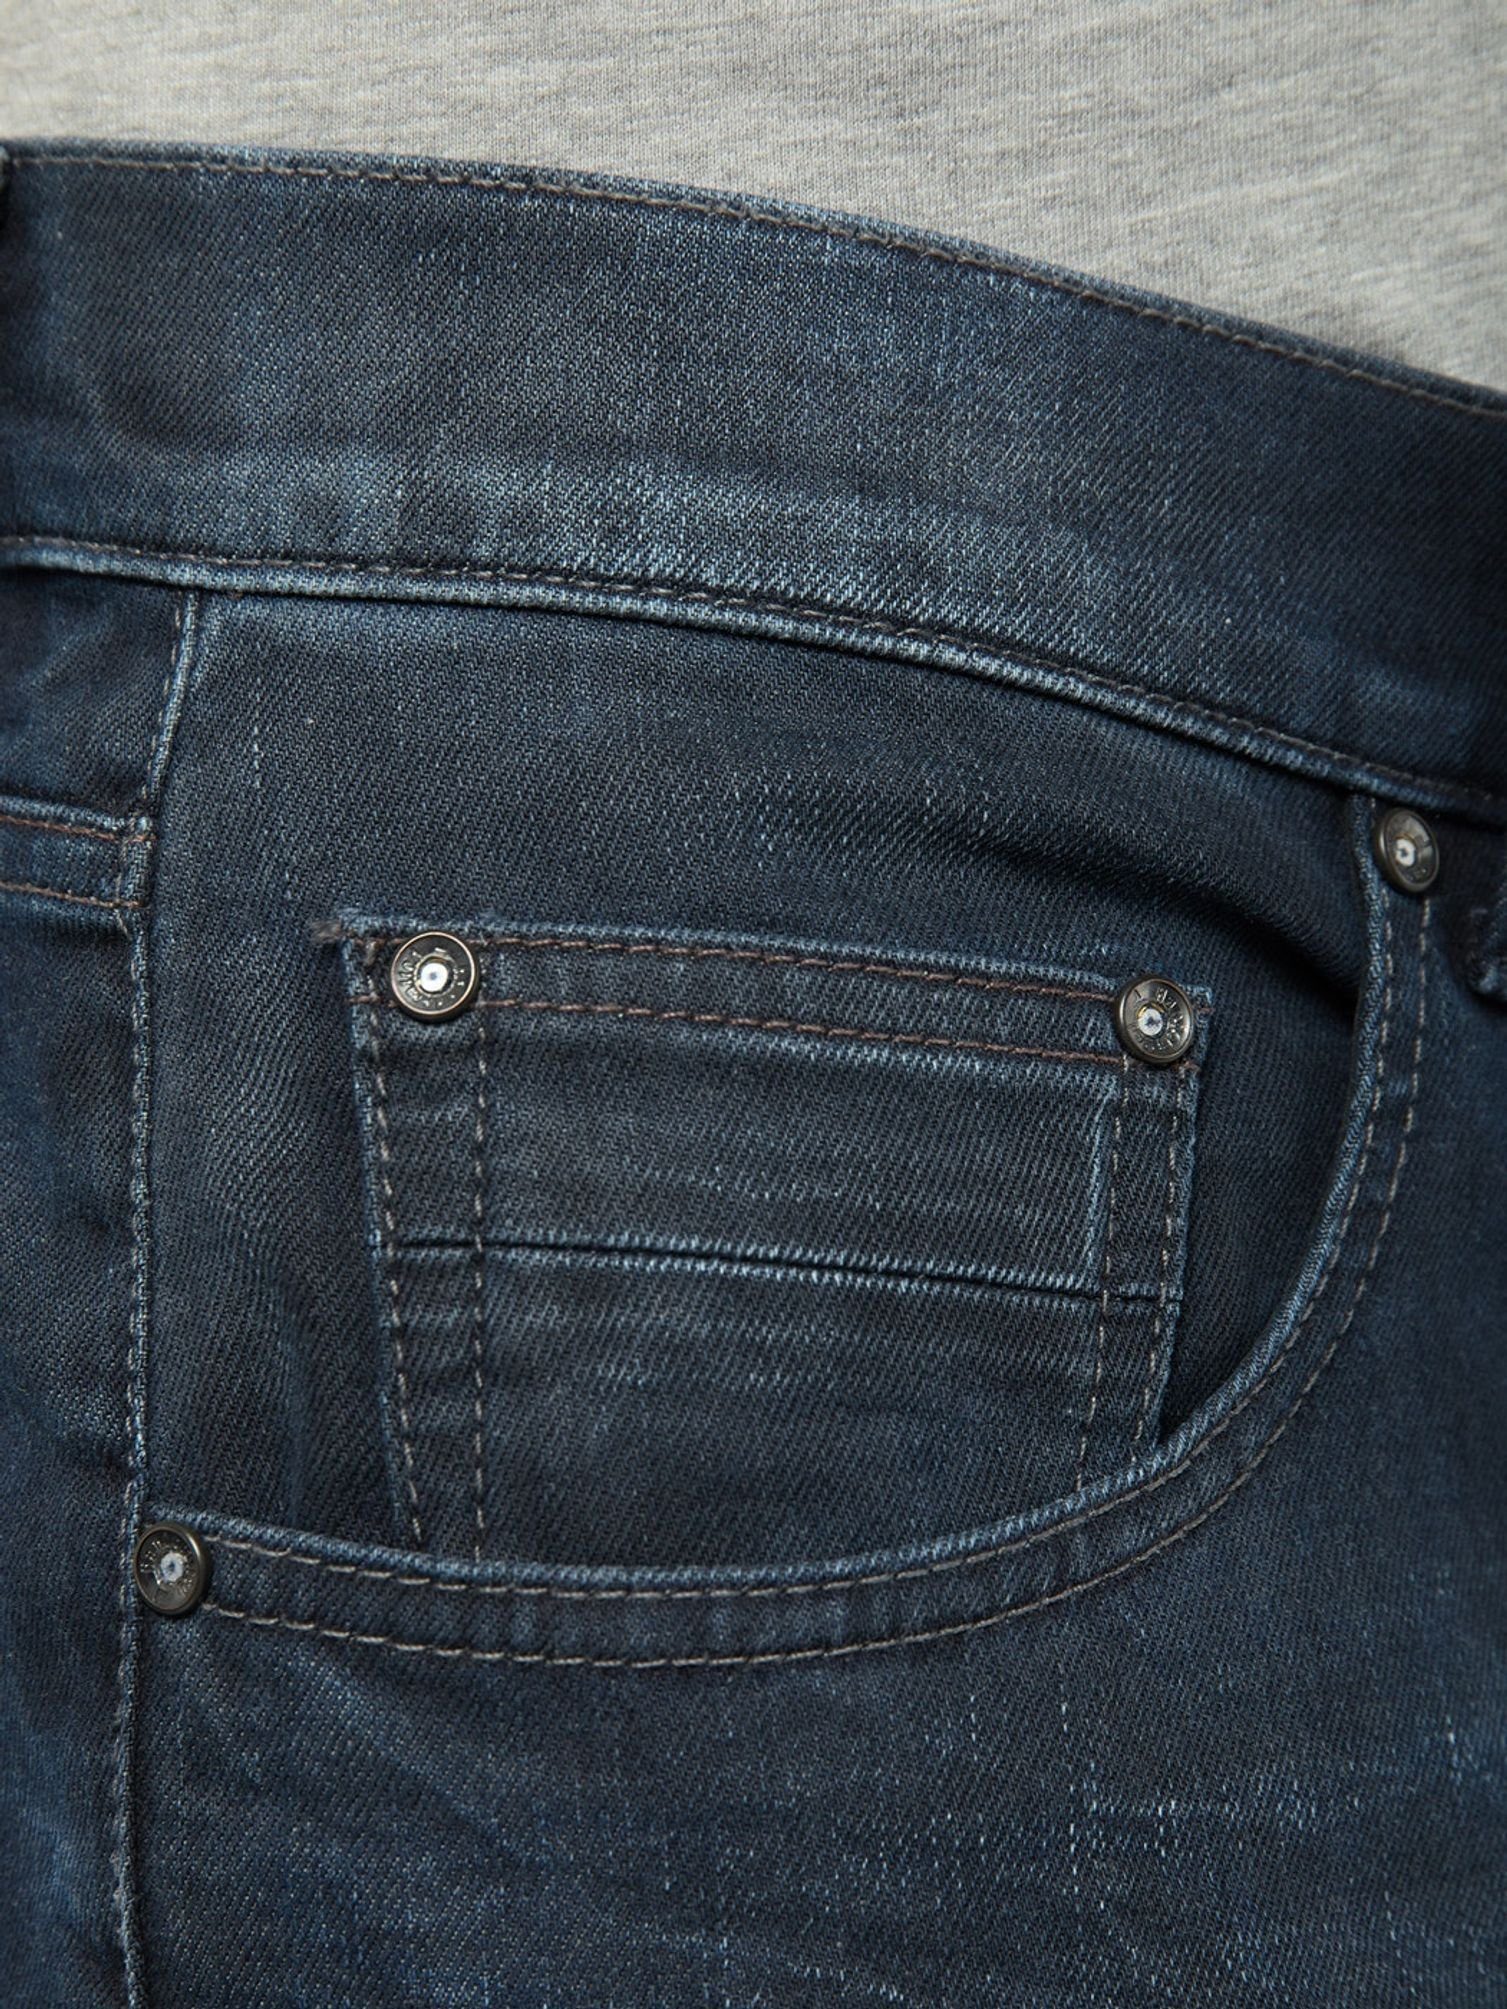 Authentic Handcrafted Jeans 5-Pocket-Jeans Rando Pioneer